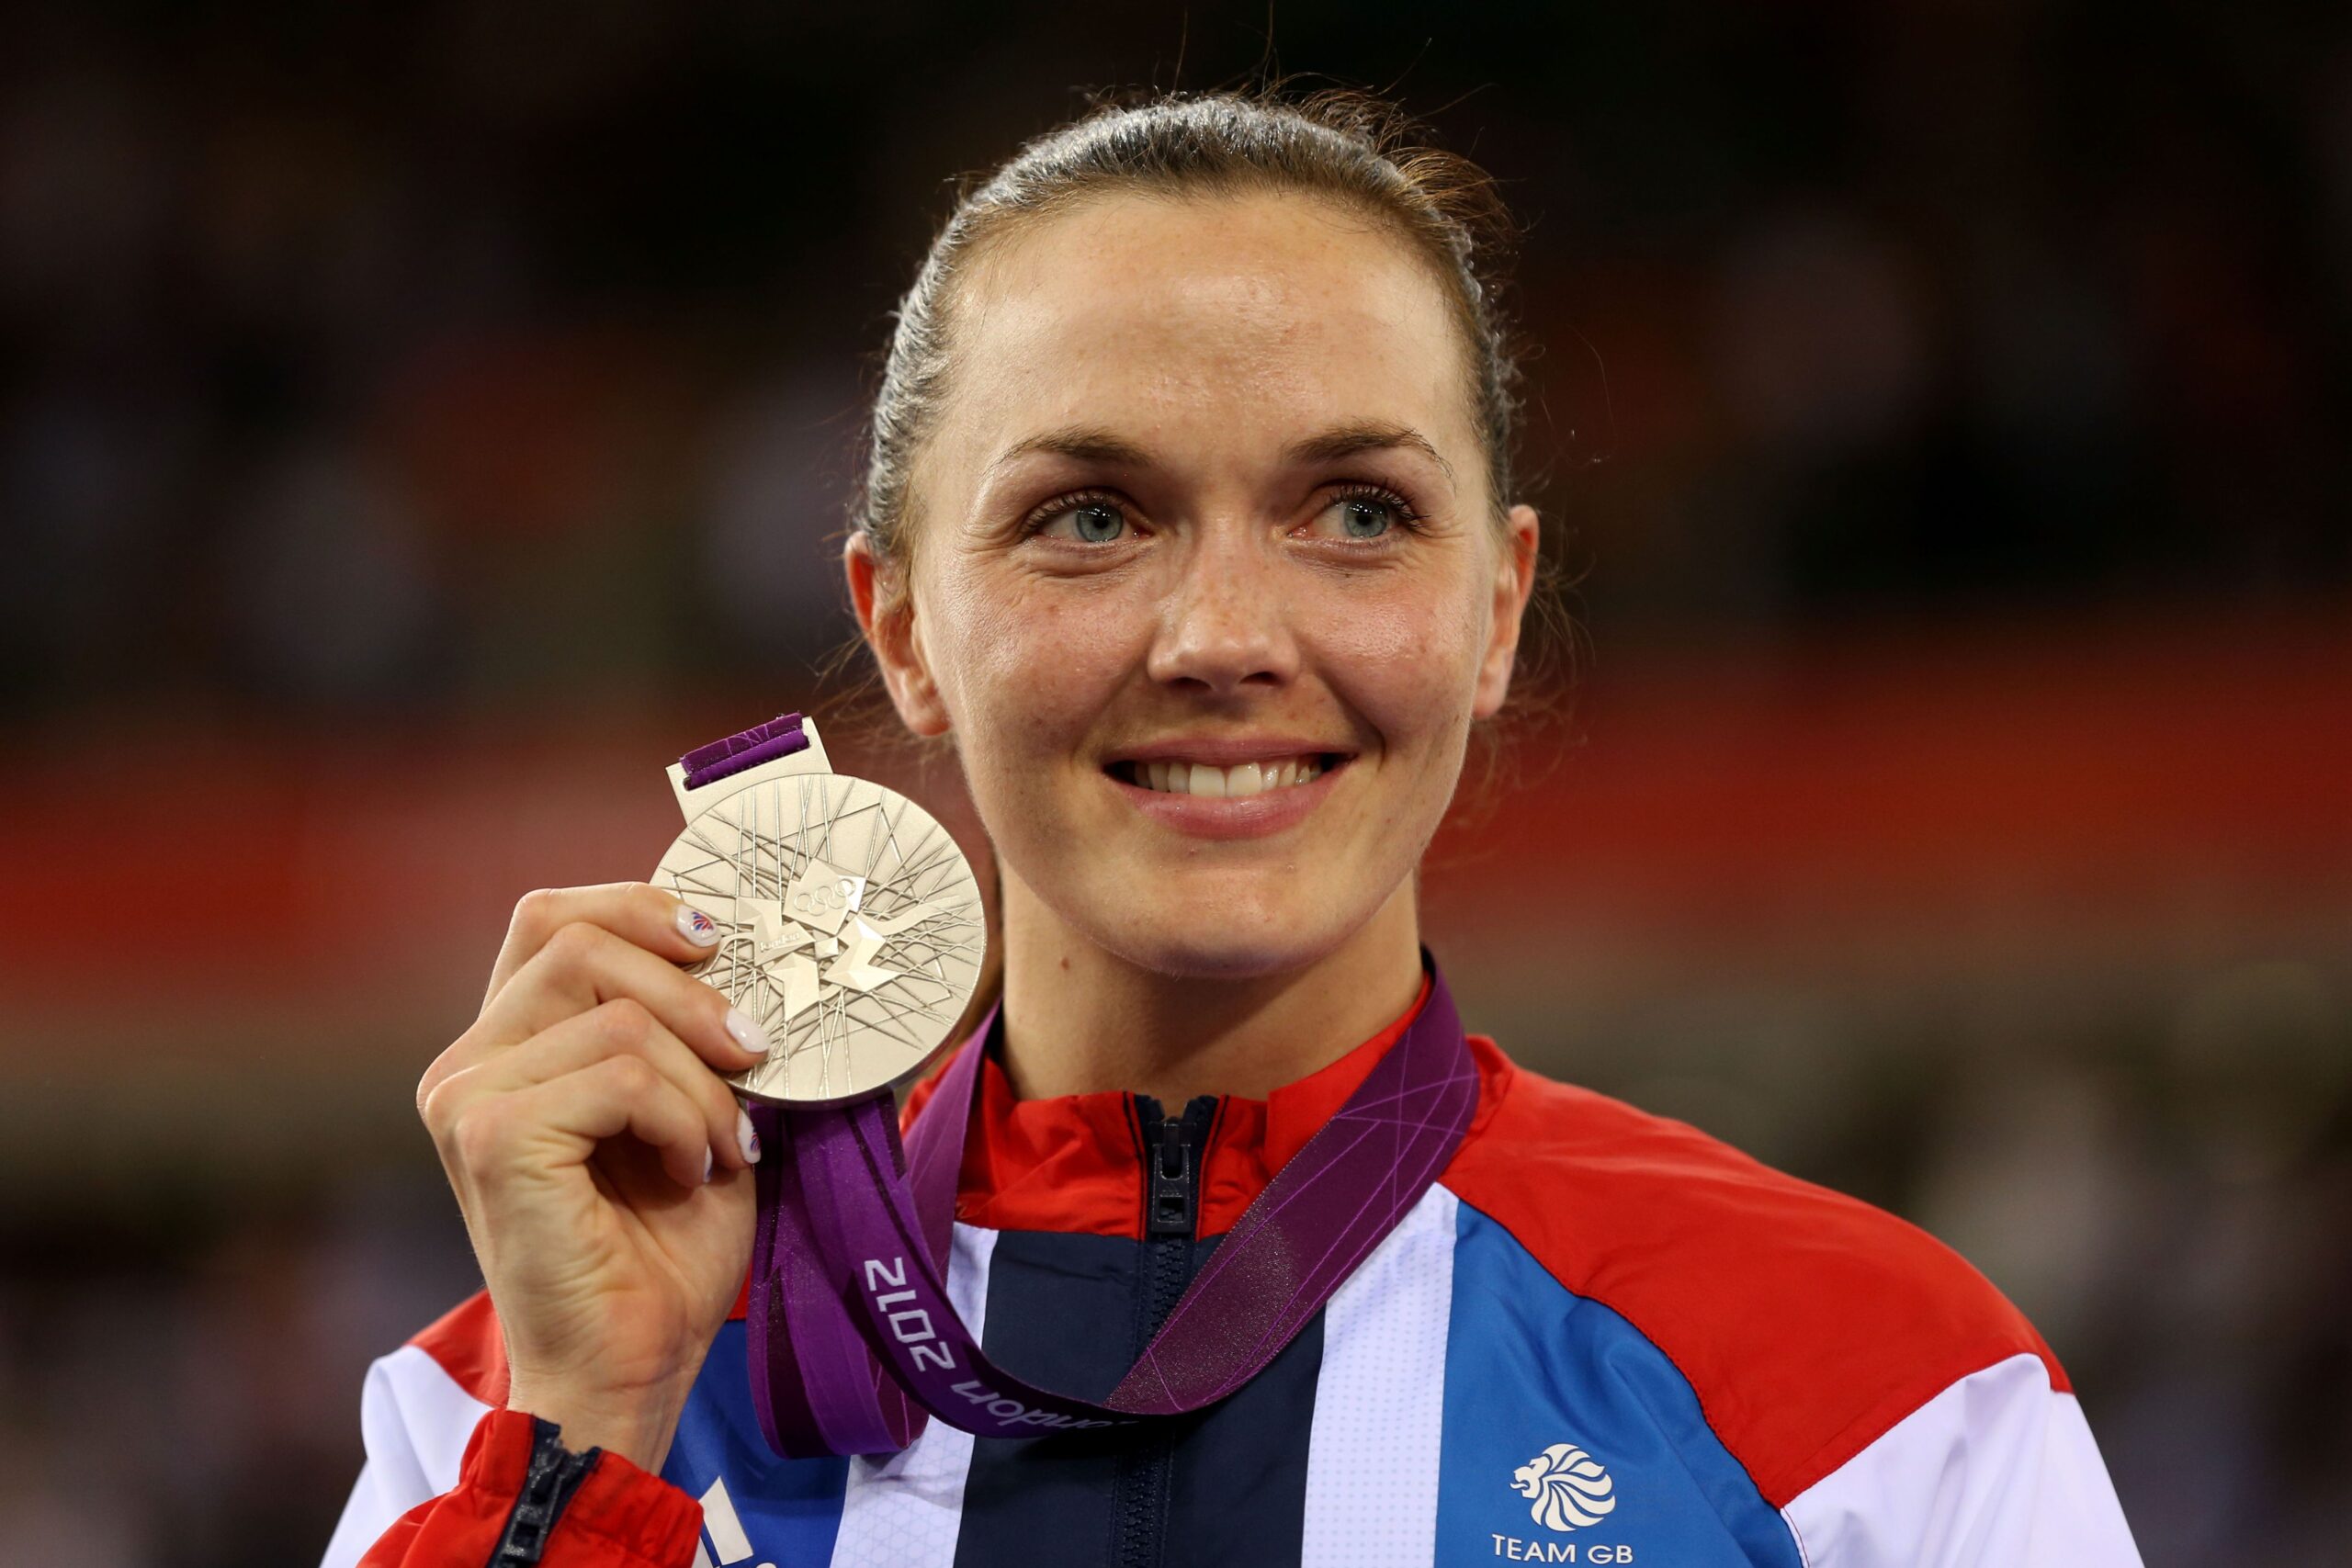 Victoria Pendleton Opens Up on Retirement Struggles After London Olympics